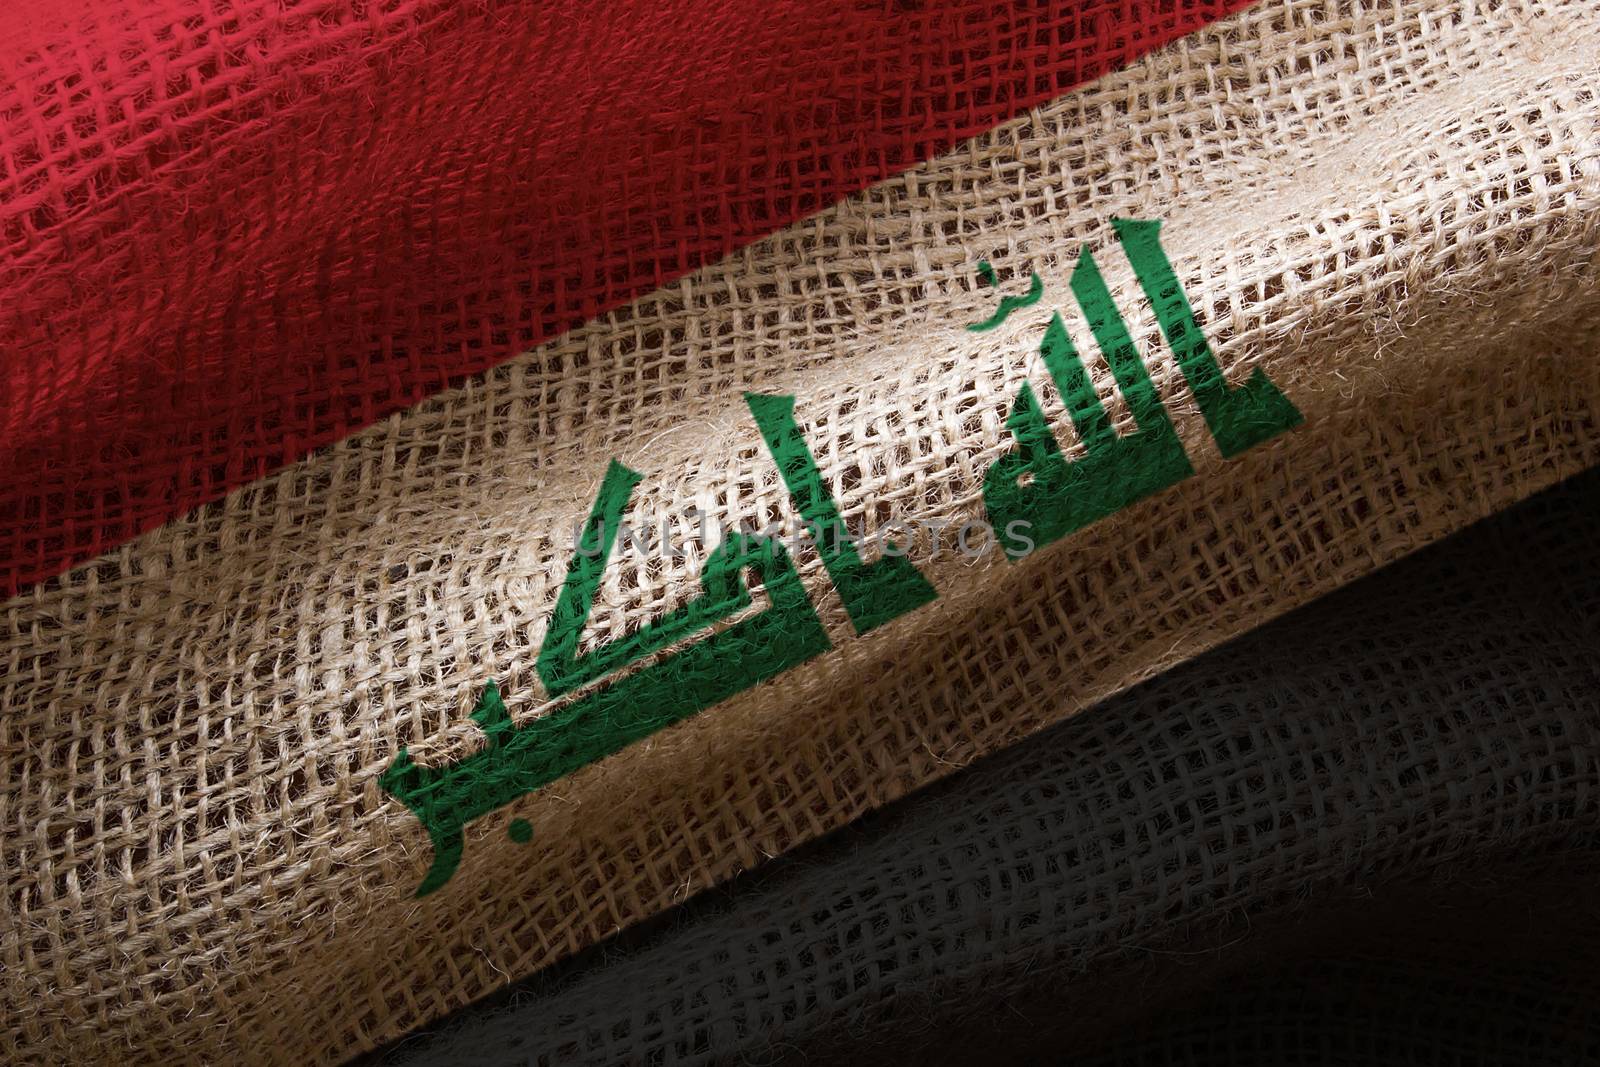 Close-up photograph of the flag of Iraq